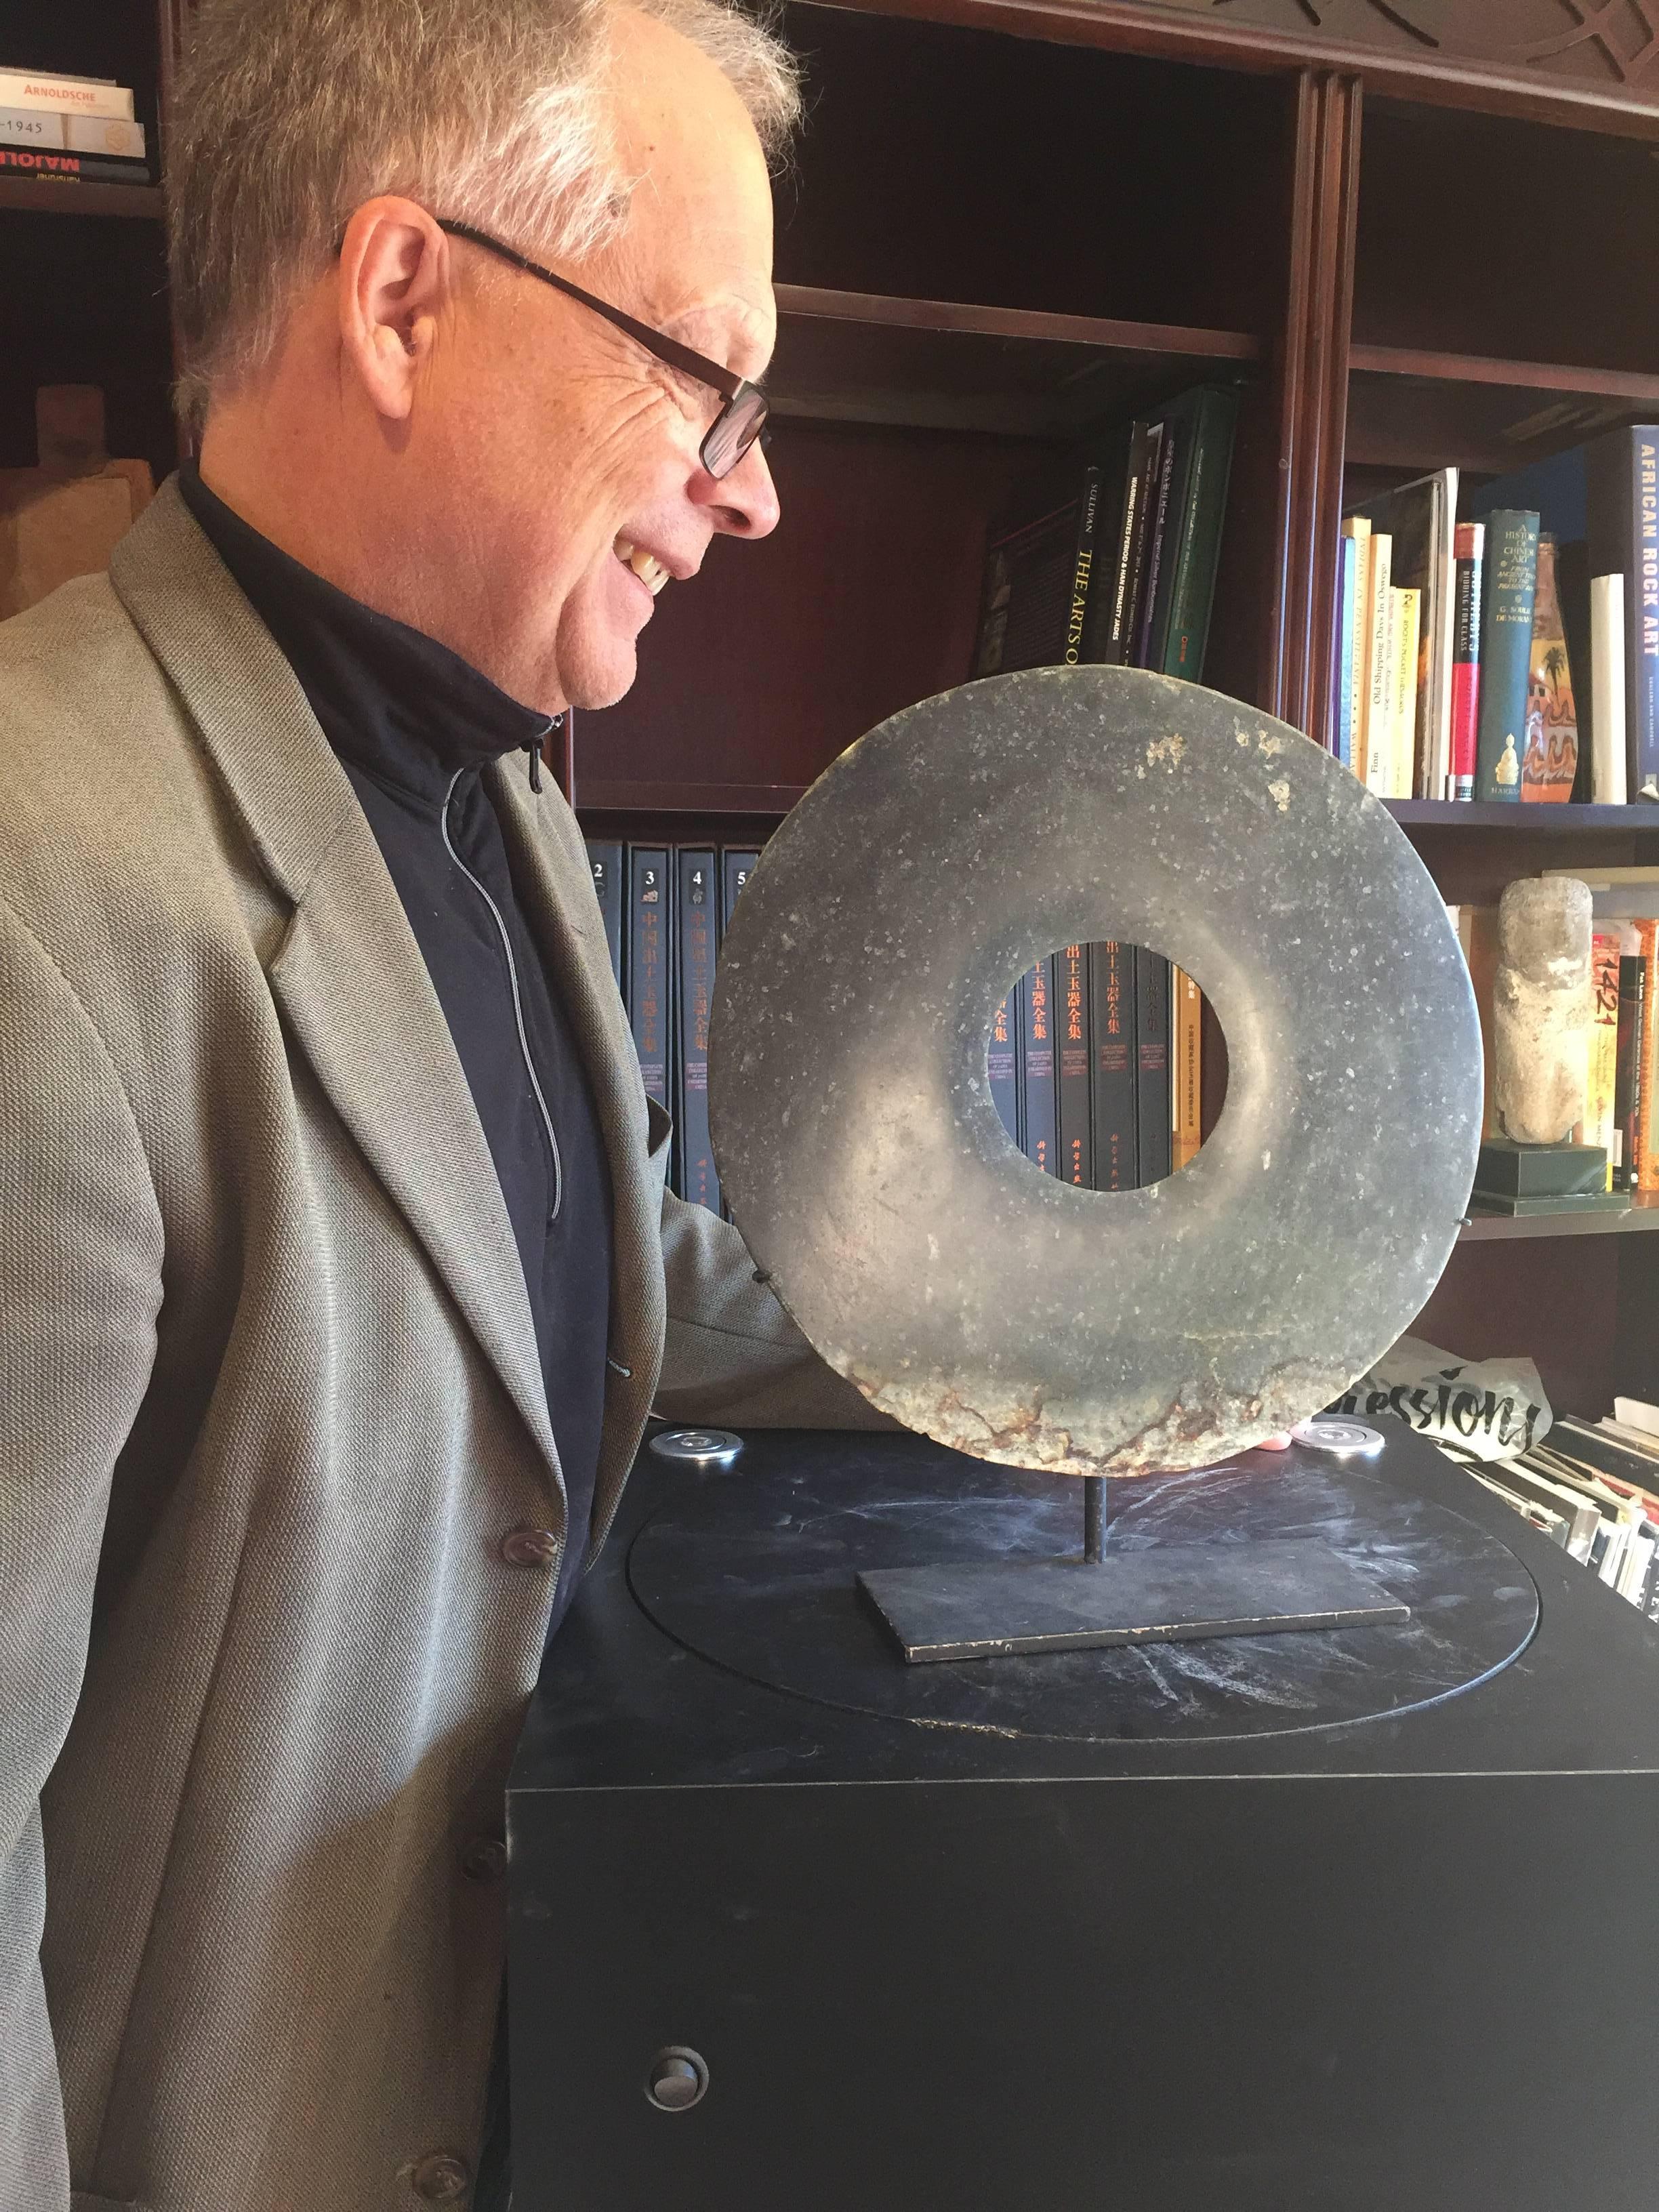 This is an authentic and extraordinary large Chinese ancient jade bi disc from the Qijia Culture, Northwestern China, 3000-2000 BCE. This comes from our private collection which we formed over a period of twenty five years while traveling